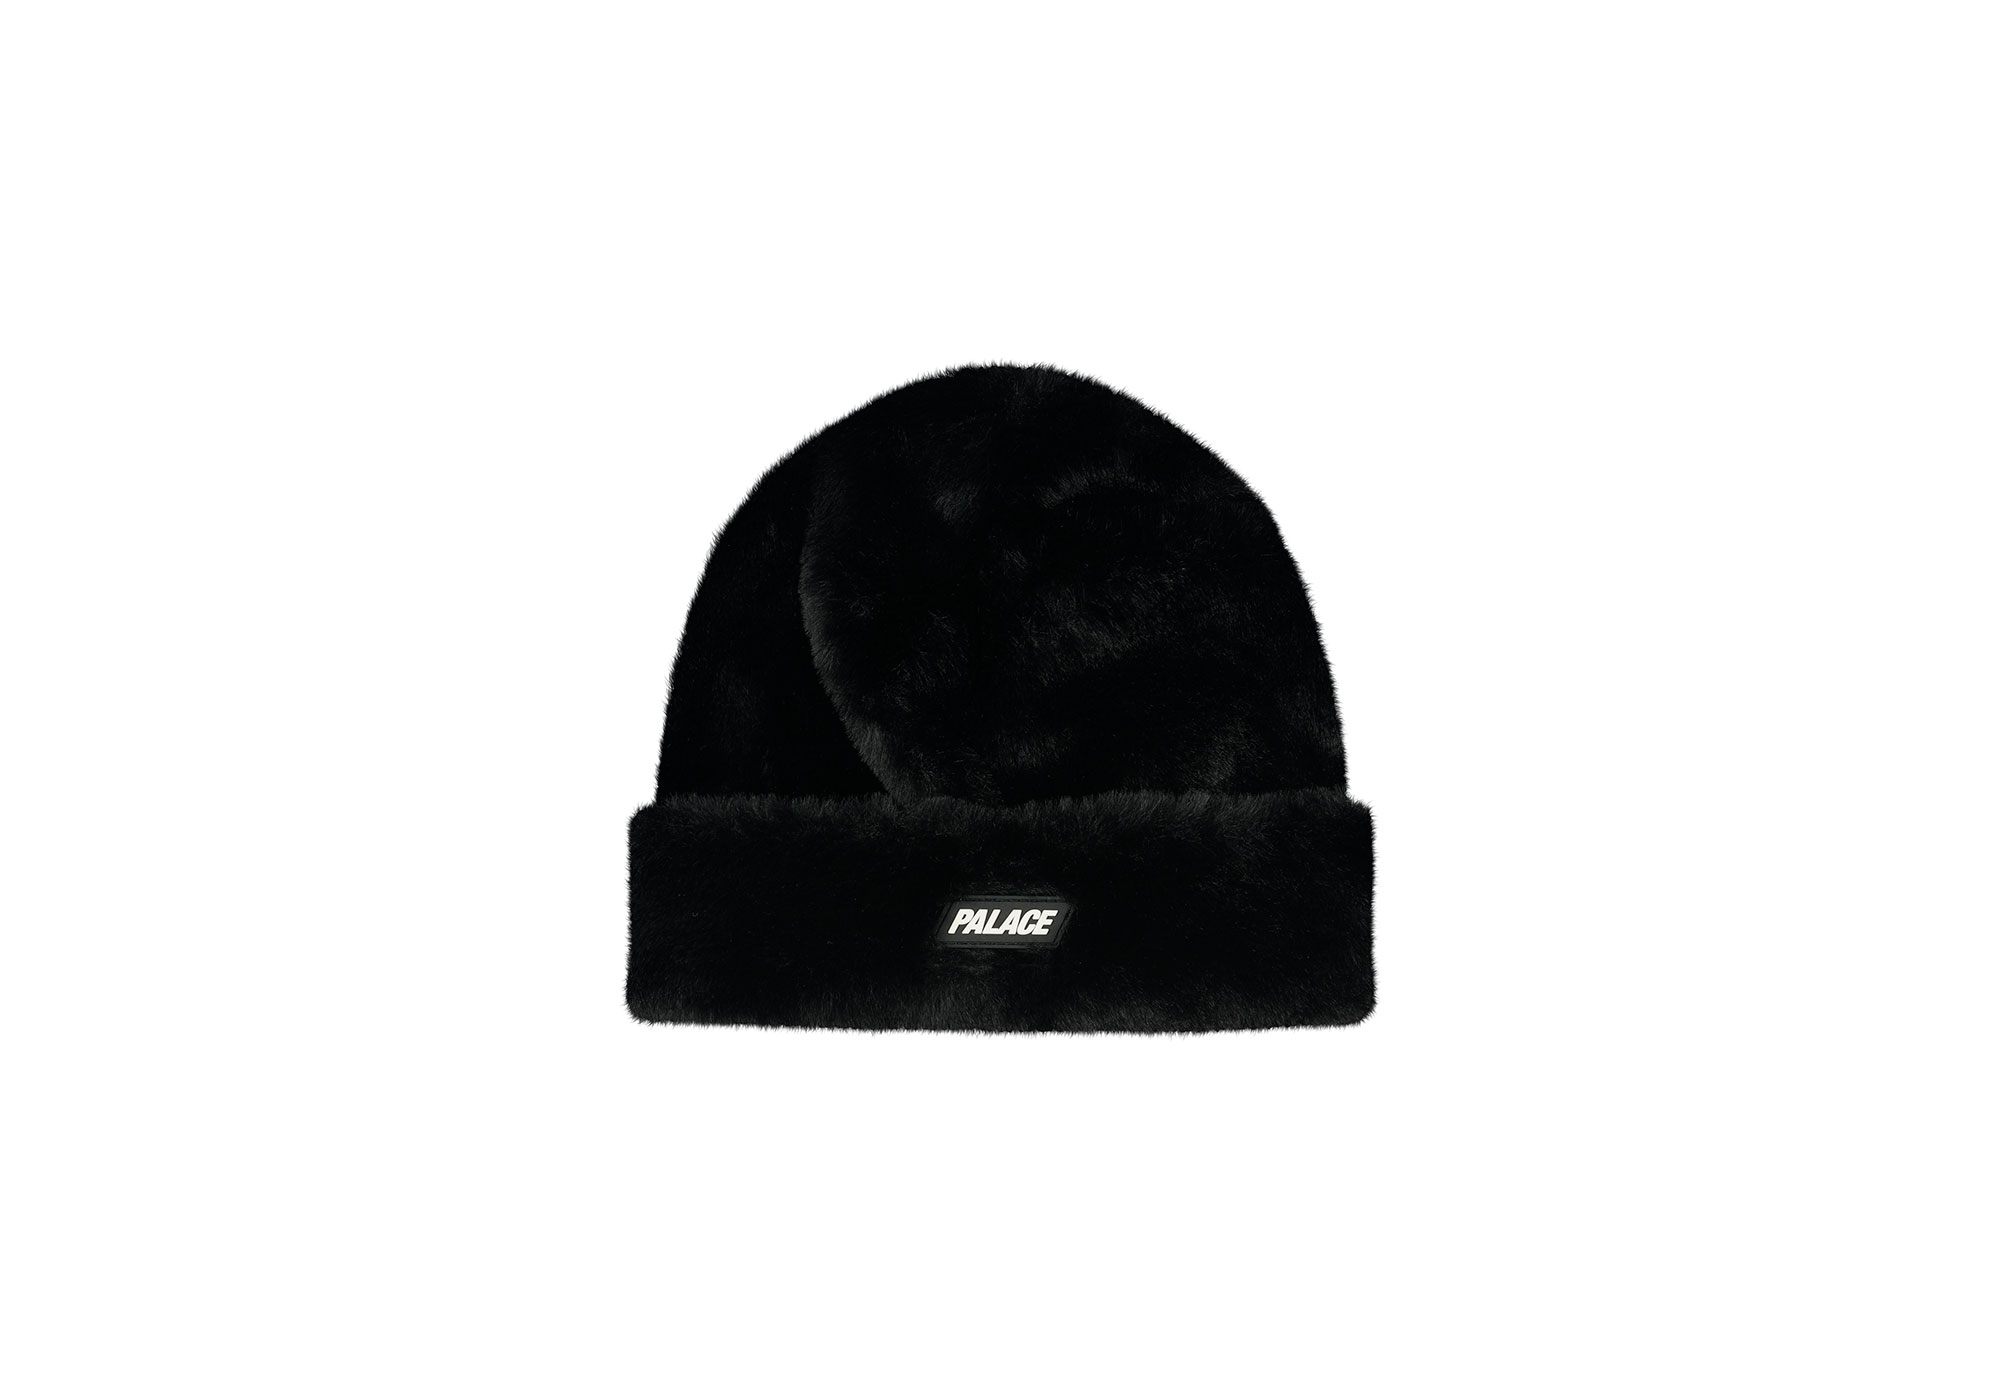 Palace Teddy Beanie Black Men's - Permanent Collection - US